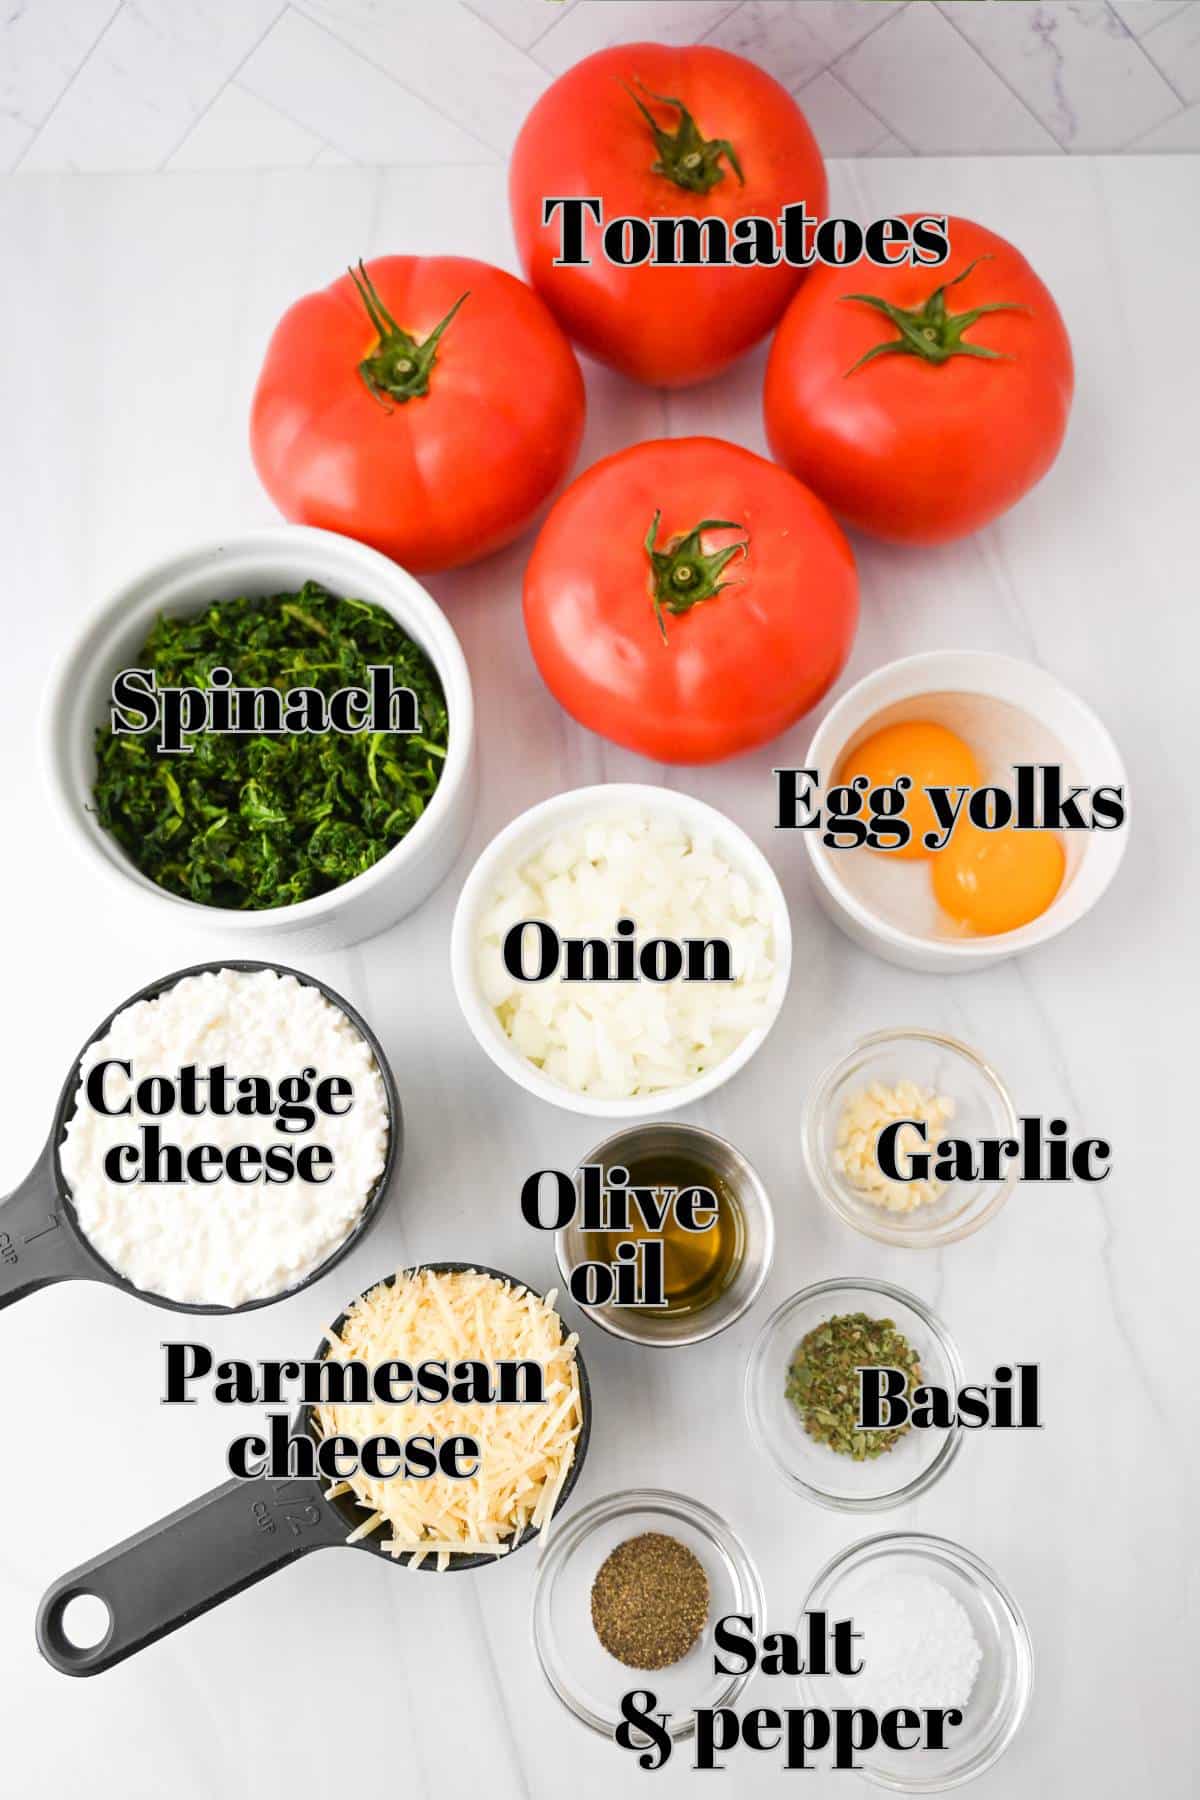 ingredients for stuffed tomatoes measured out on a counter